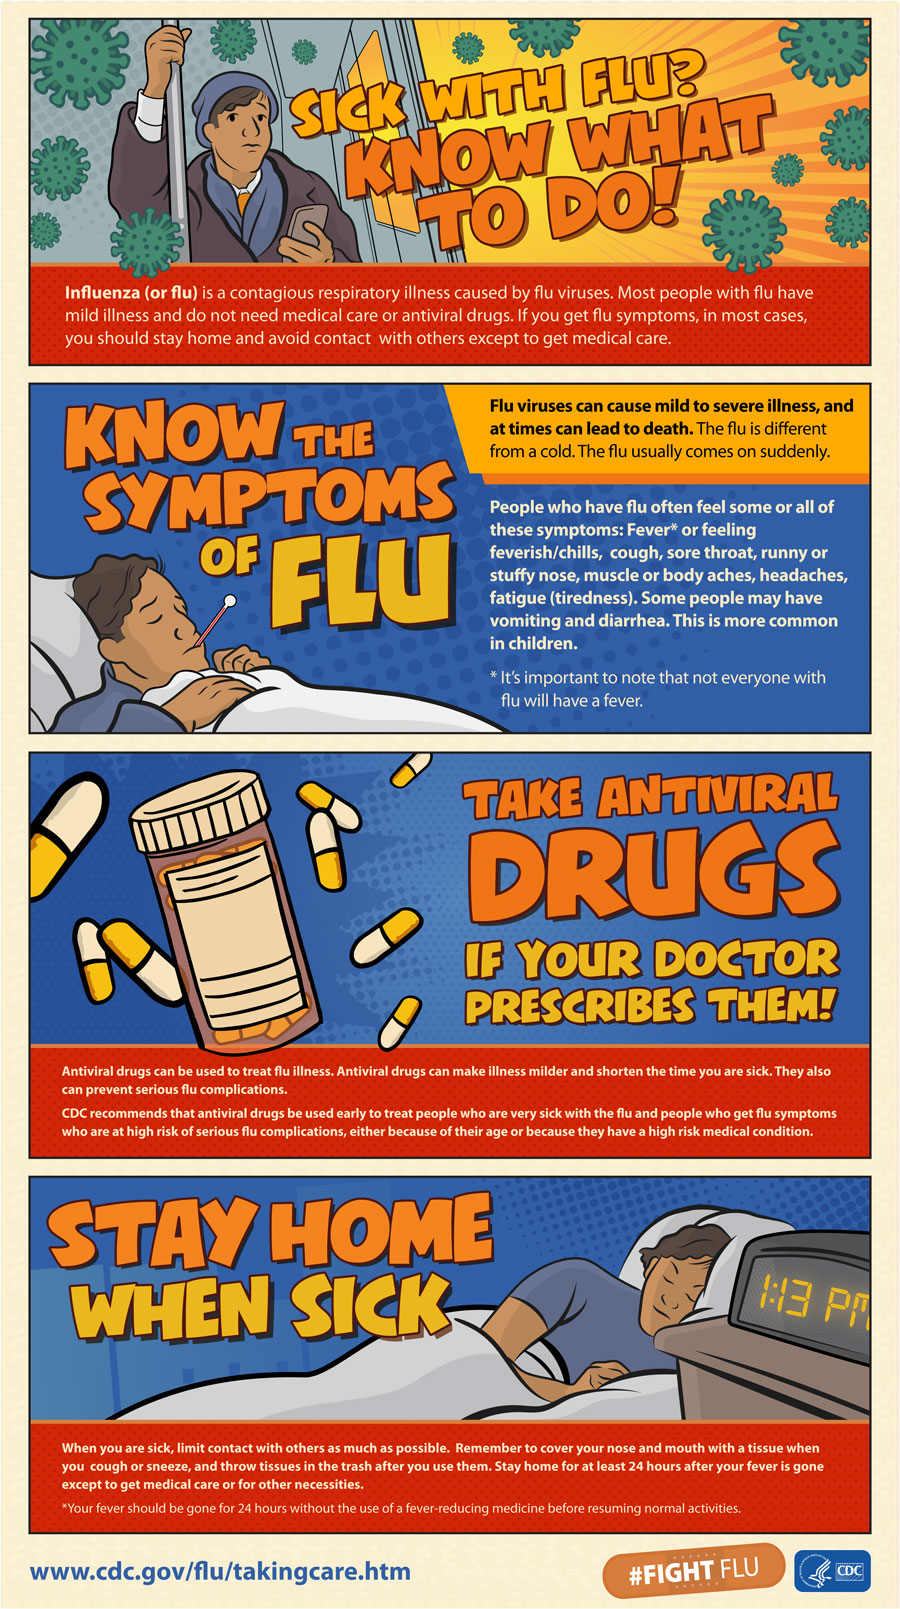 Sick With Flu? Know What to Do!